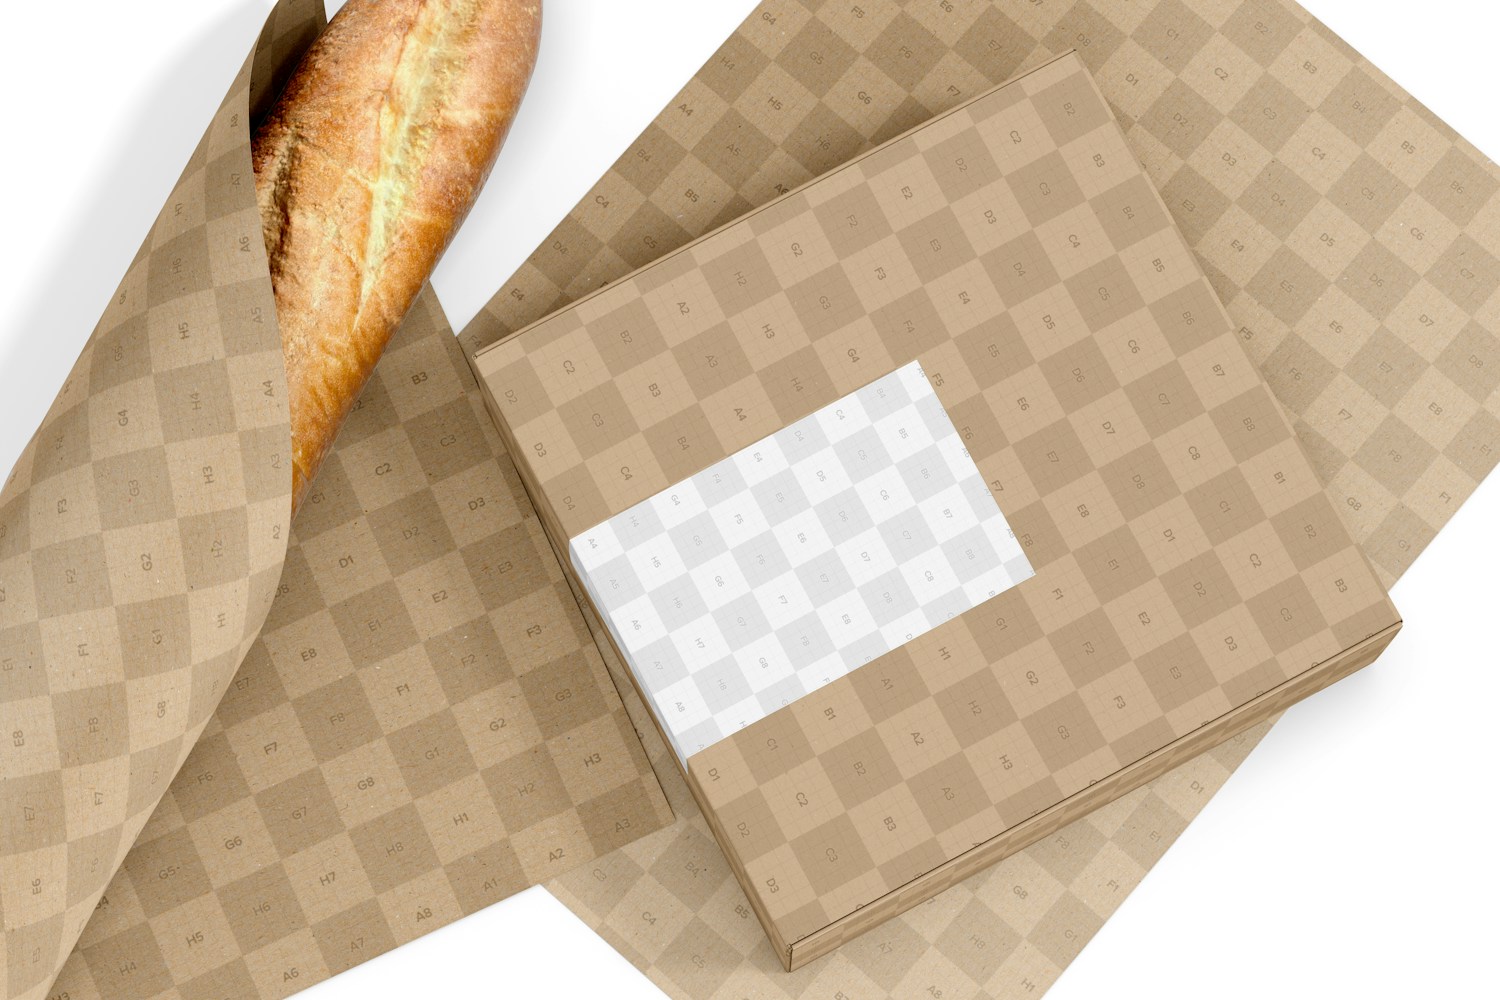 Bread Box with Label Mockup, Top View